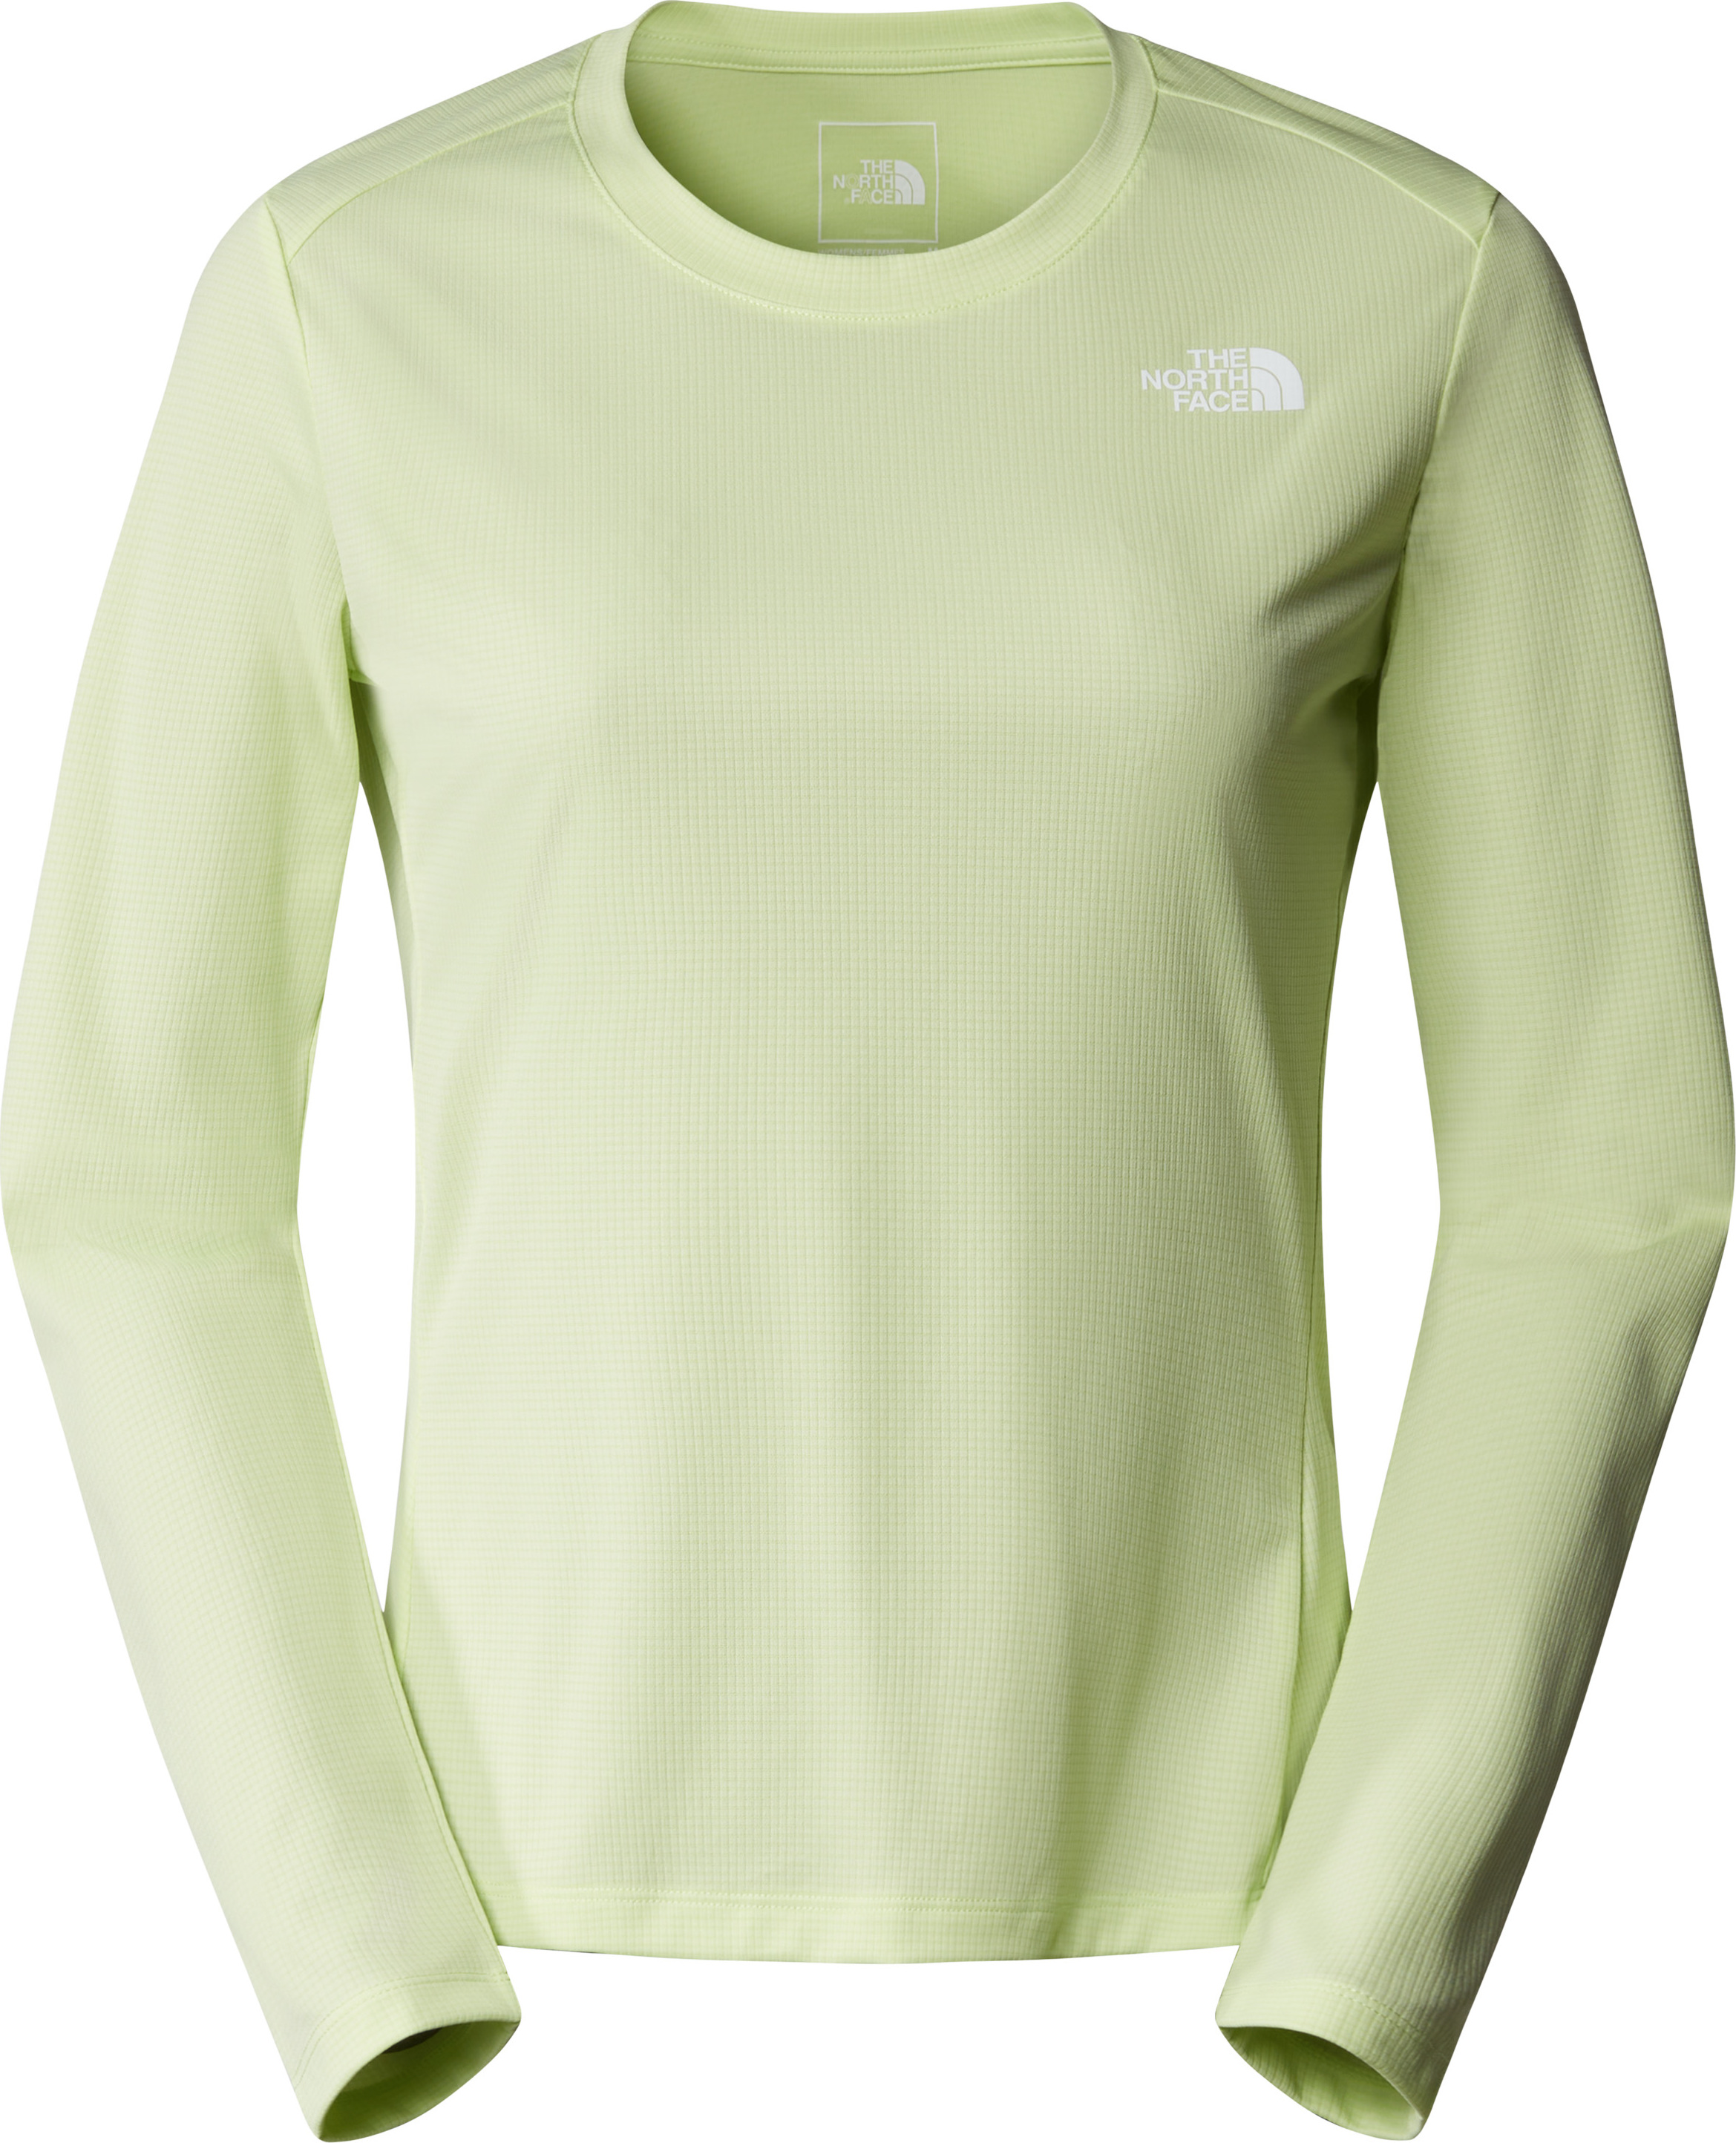 The North Face Women’s Shadow Long-Sleeve T-Shirt Astro Lime